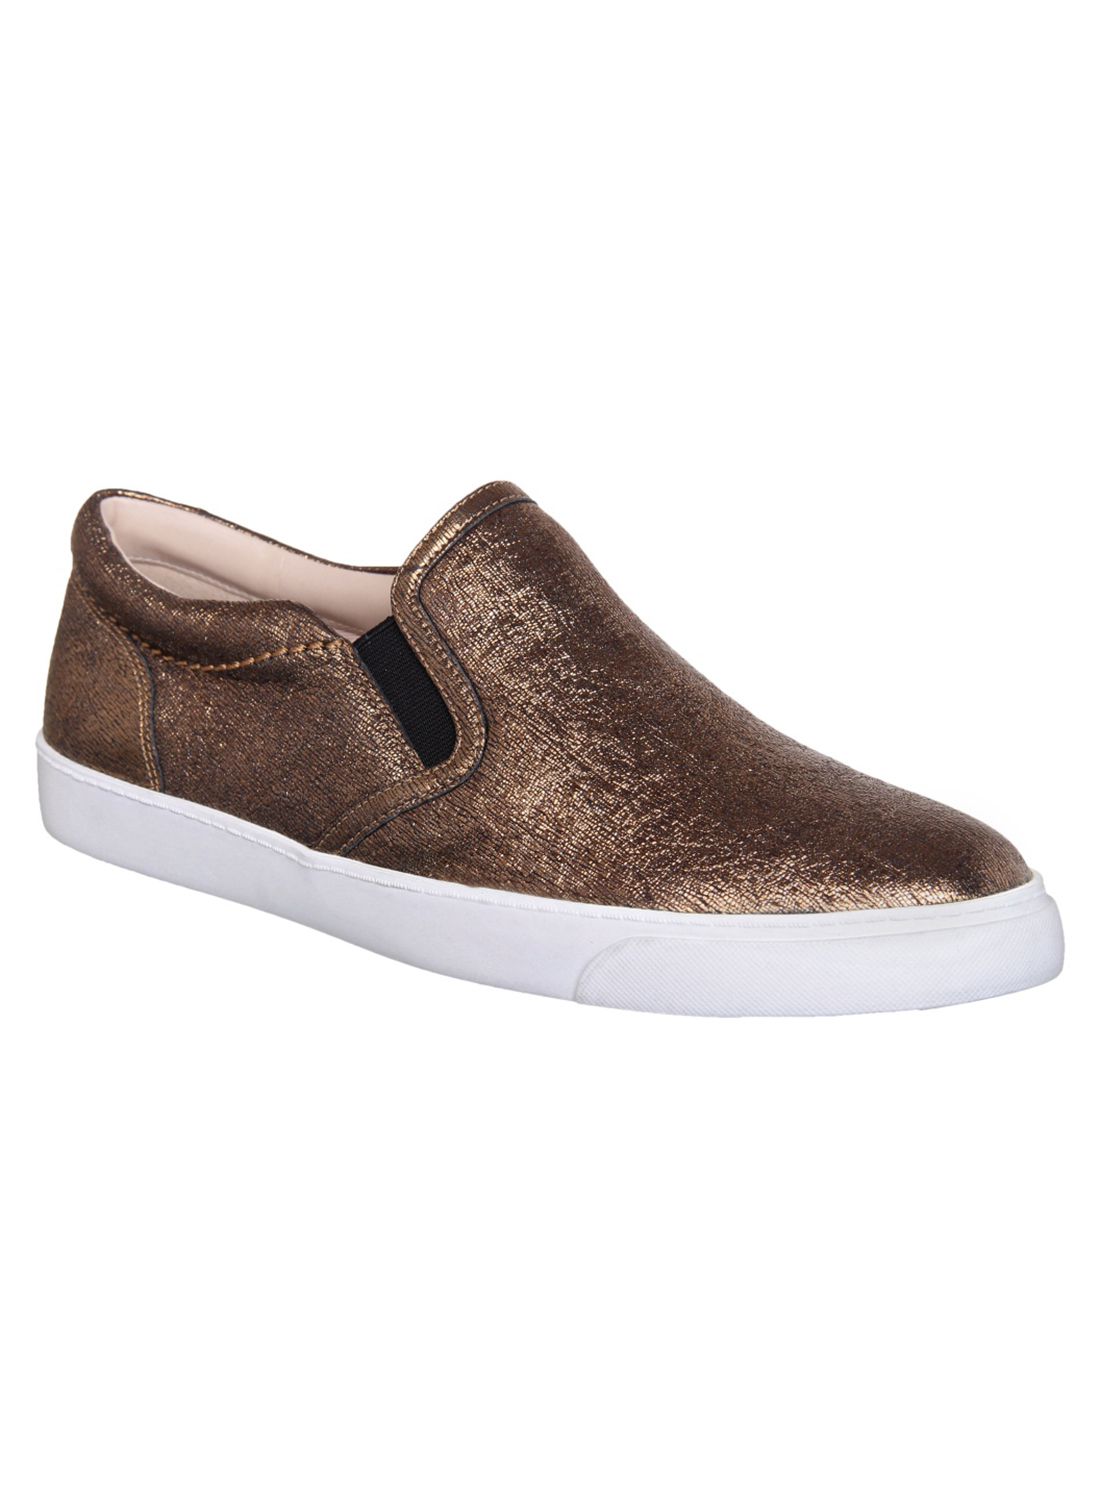 Clarks Gold Casual Shoes Price in India- Buy Clarks Gold Casual Shoes ...